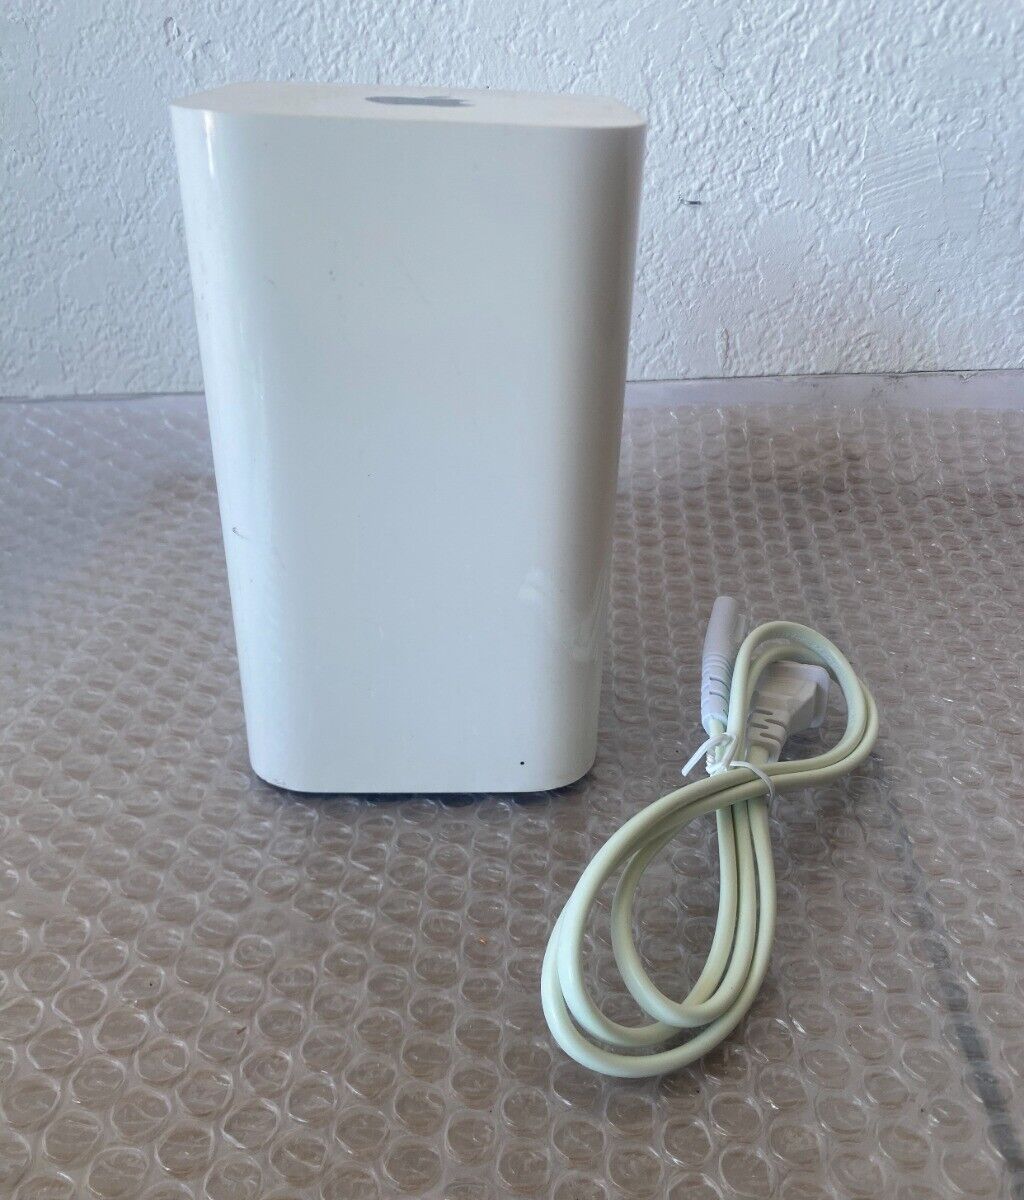 Apple AirPort Extreme A1521 3-Port Gigabit Wi-Fi 802.11 AC Router ME918LL/A